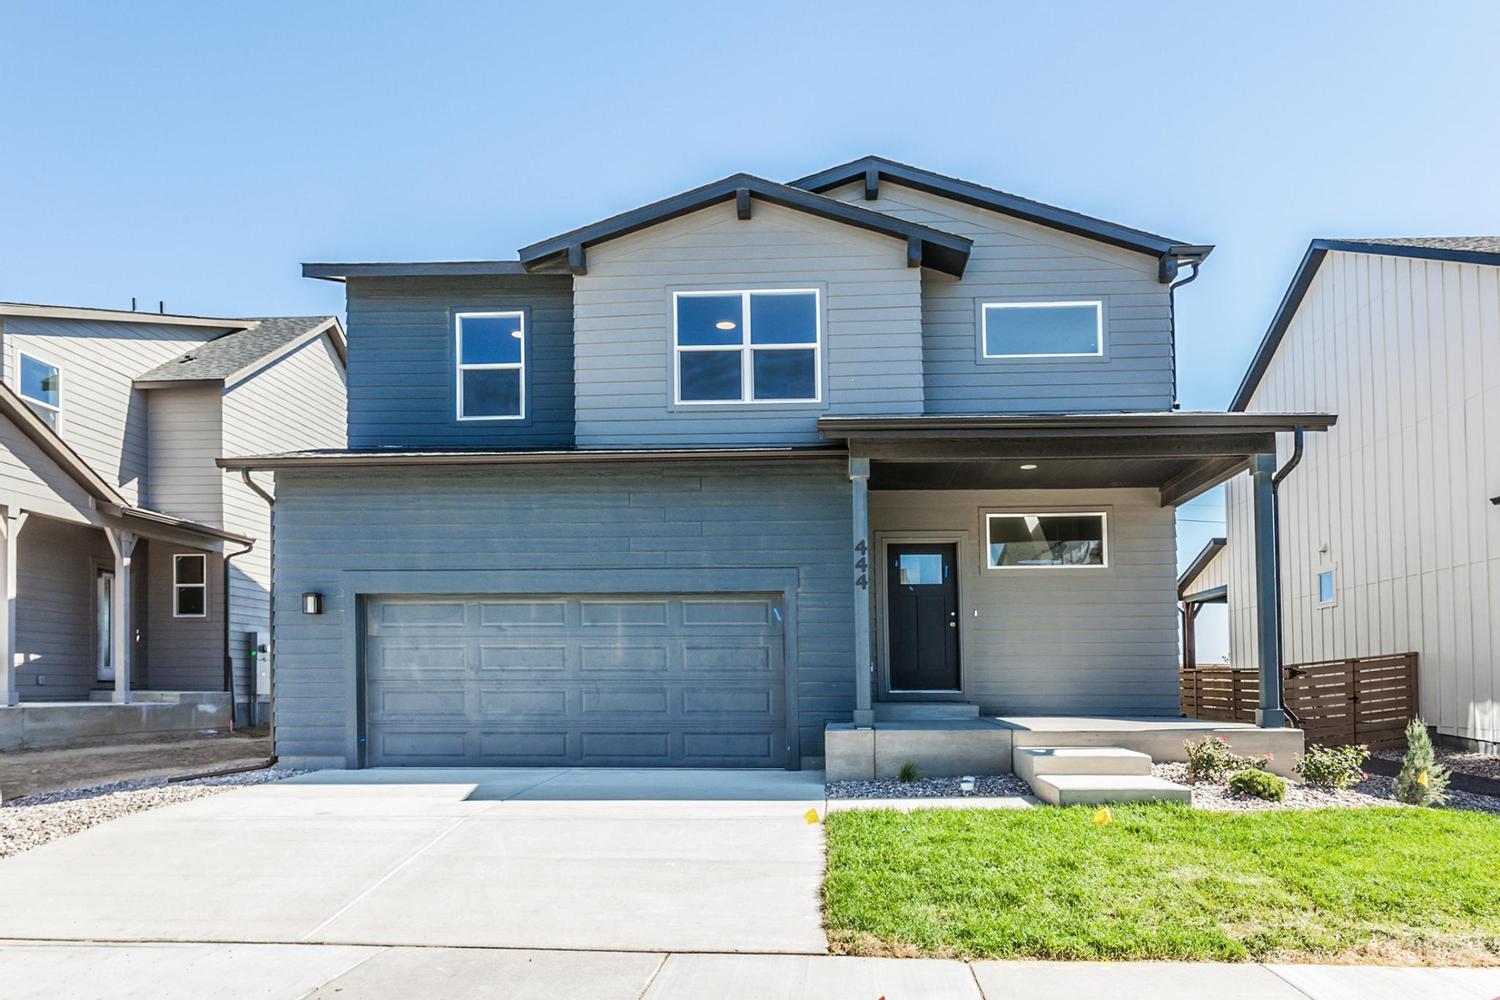 728 67th, Greeley, CO